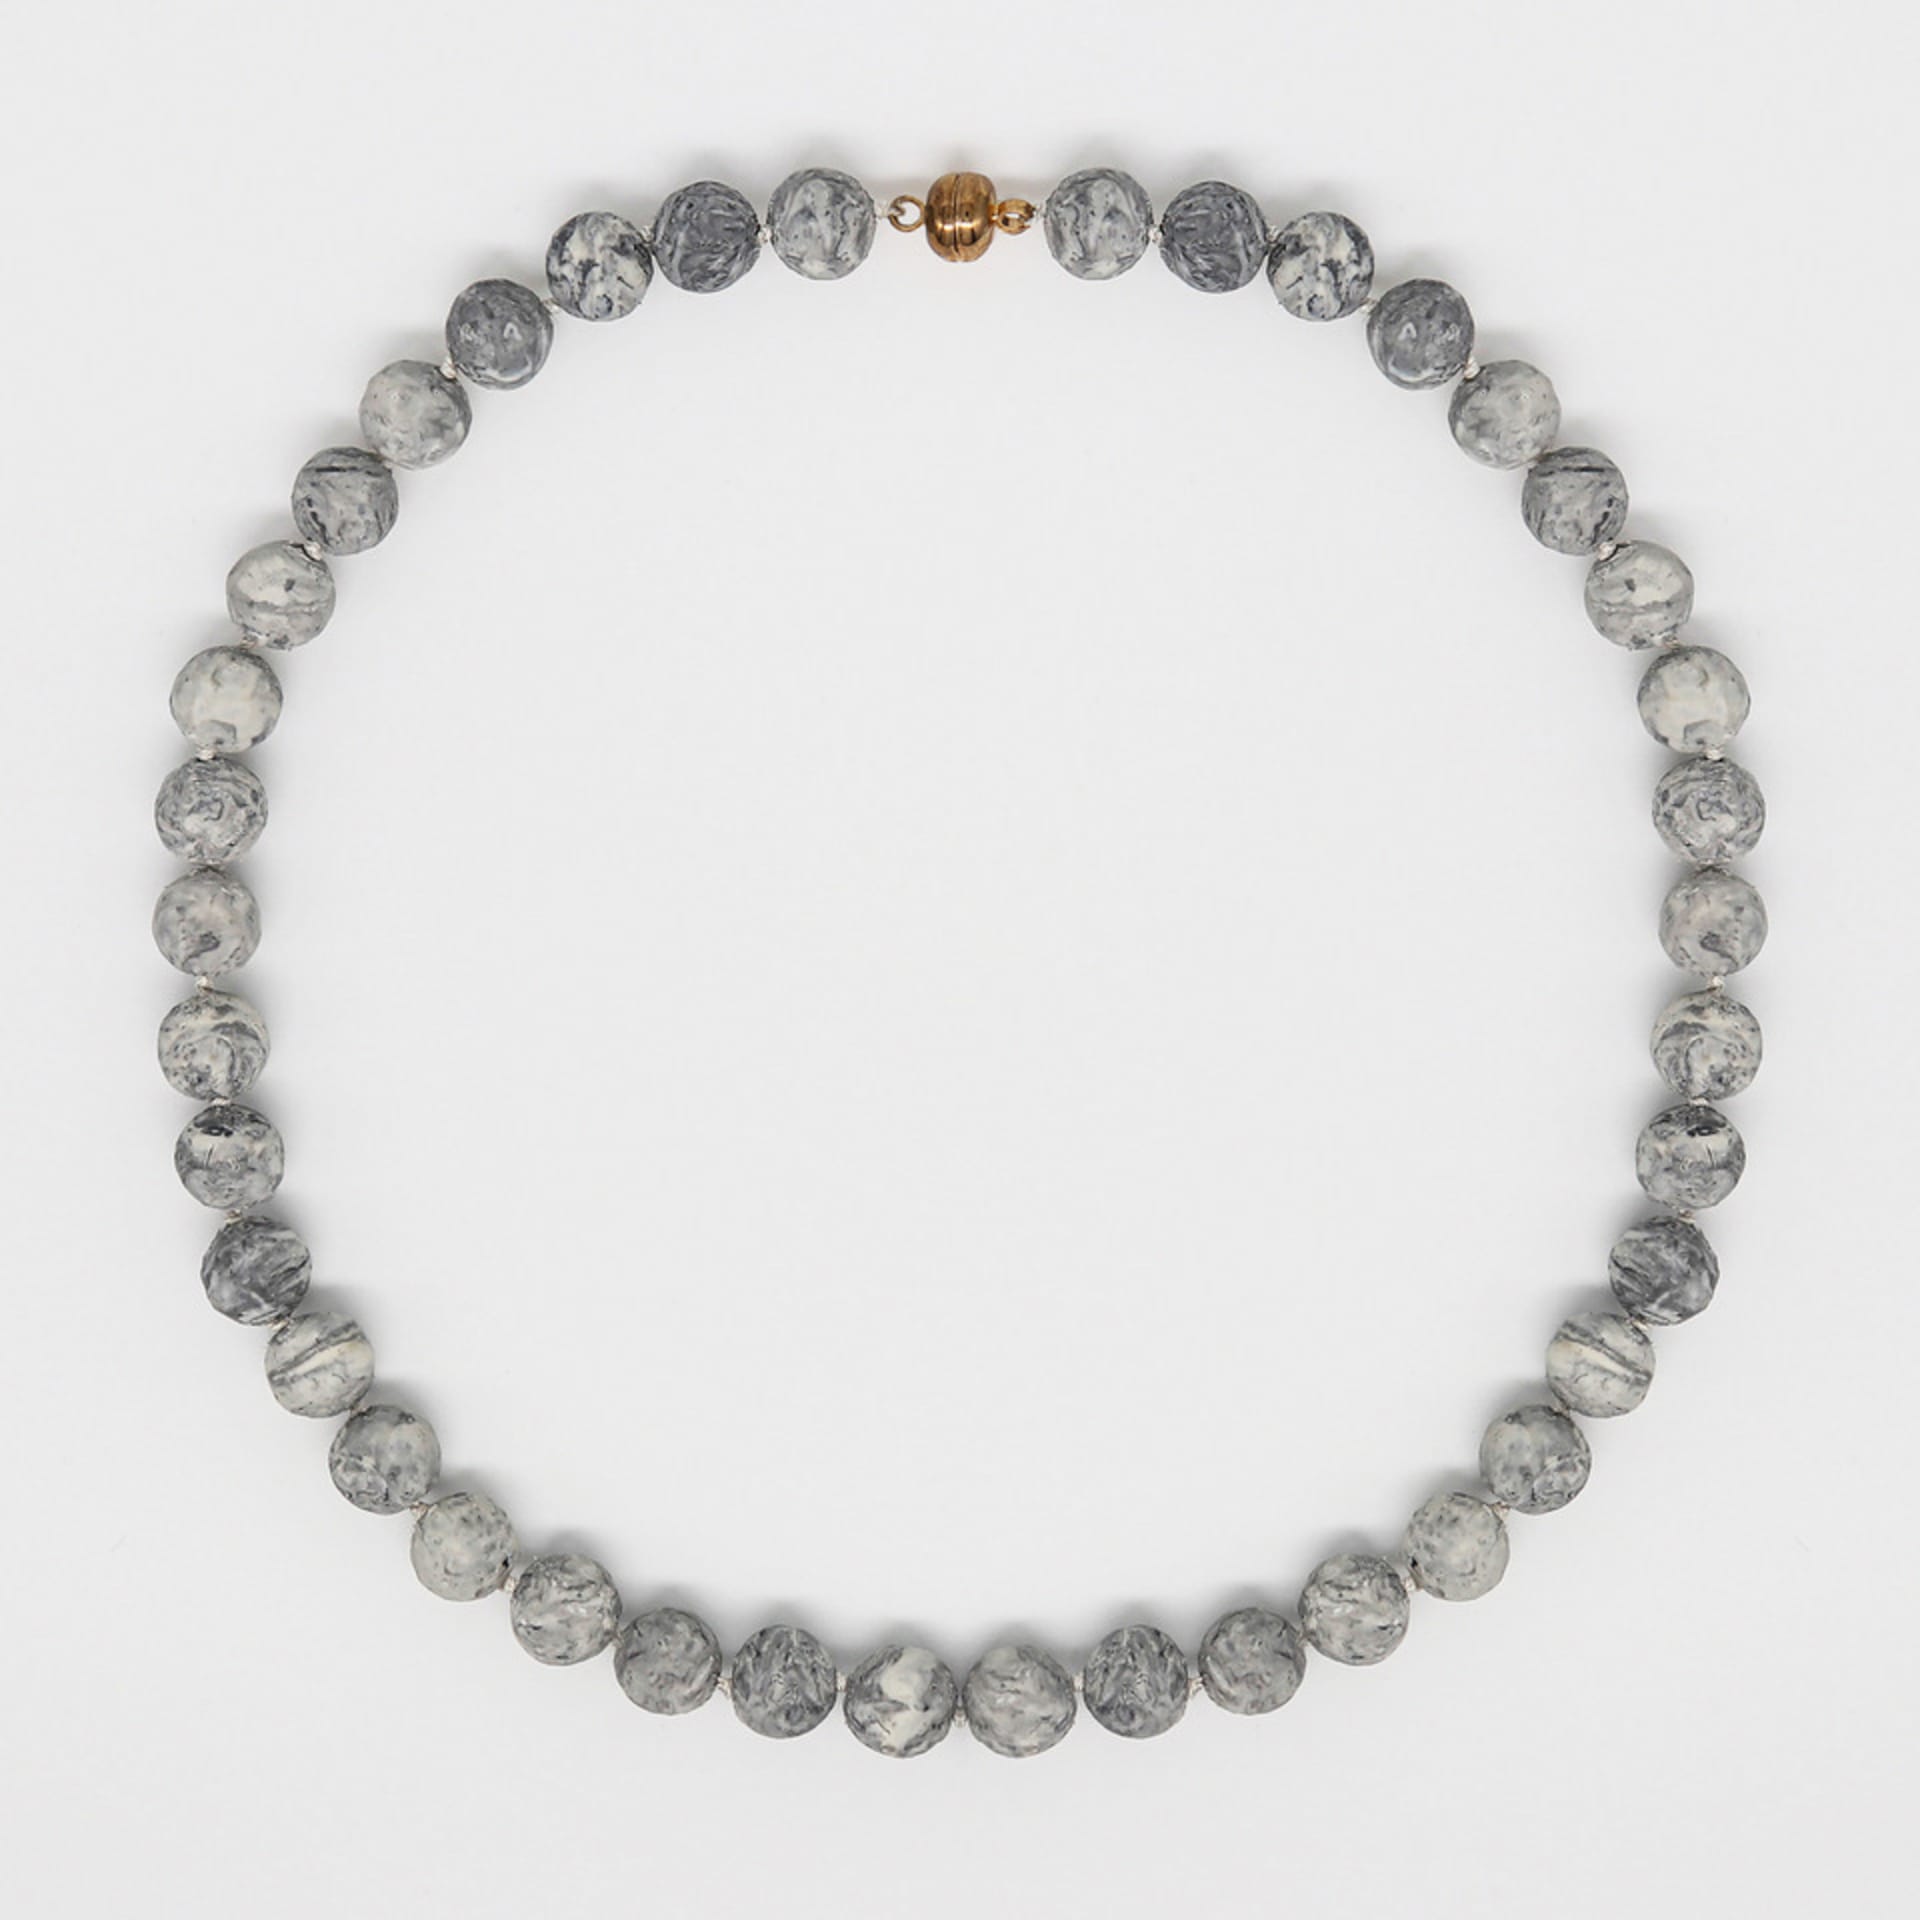 A round necklace made of beads formed from erased text.